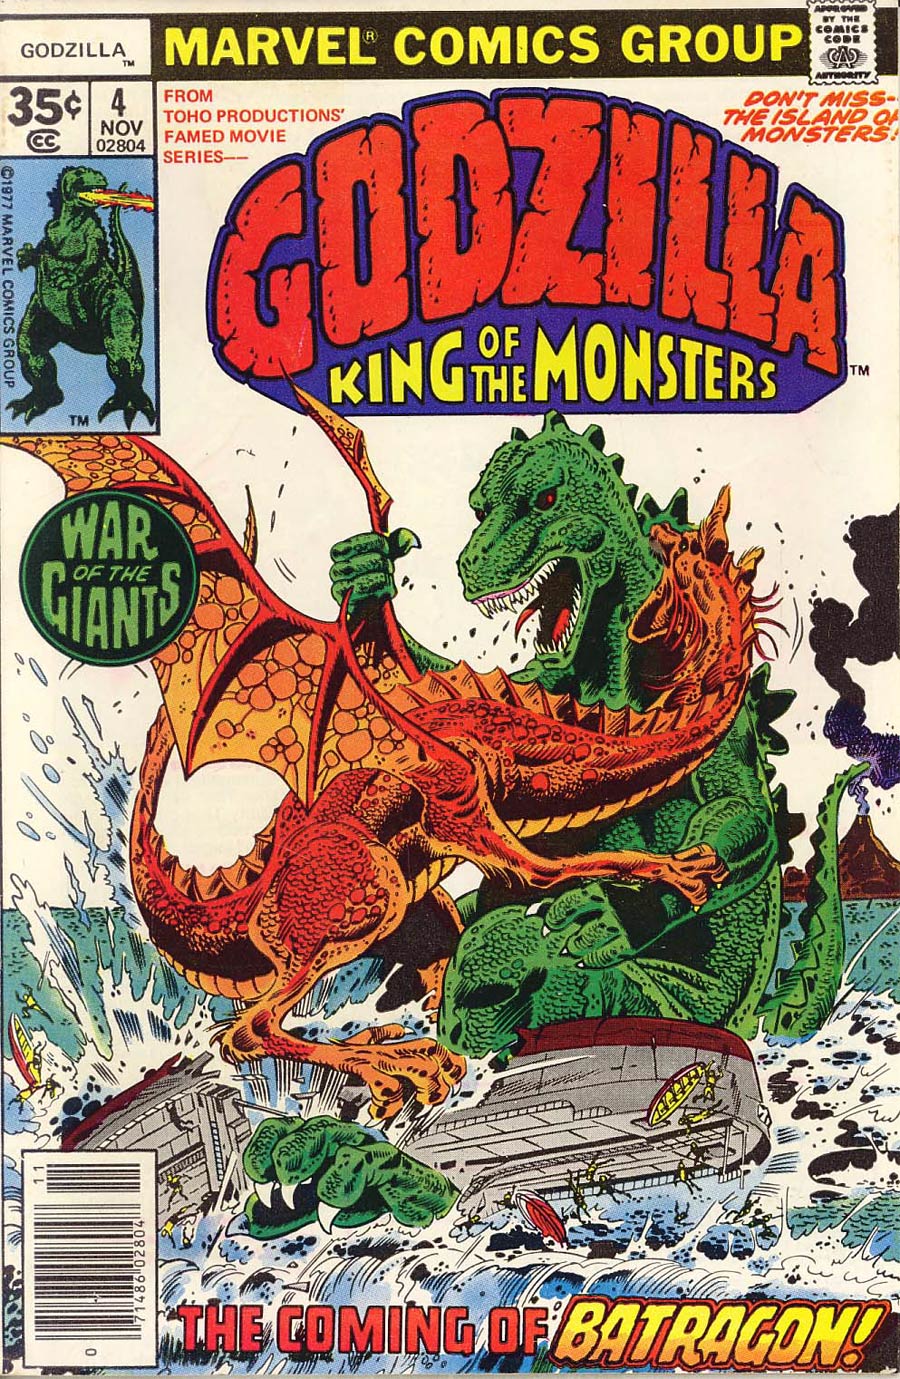 Godzilla King Of The Monsters #4